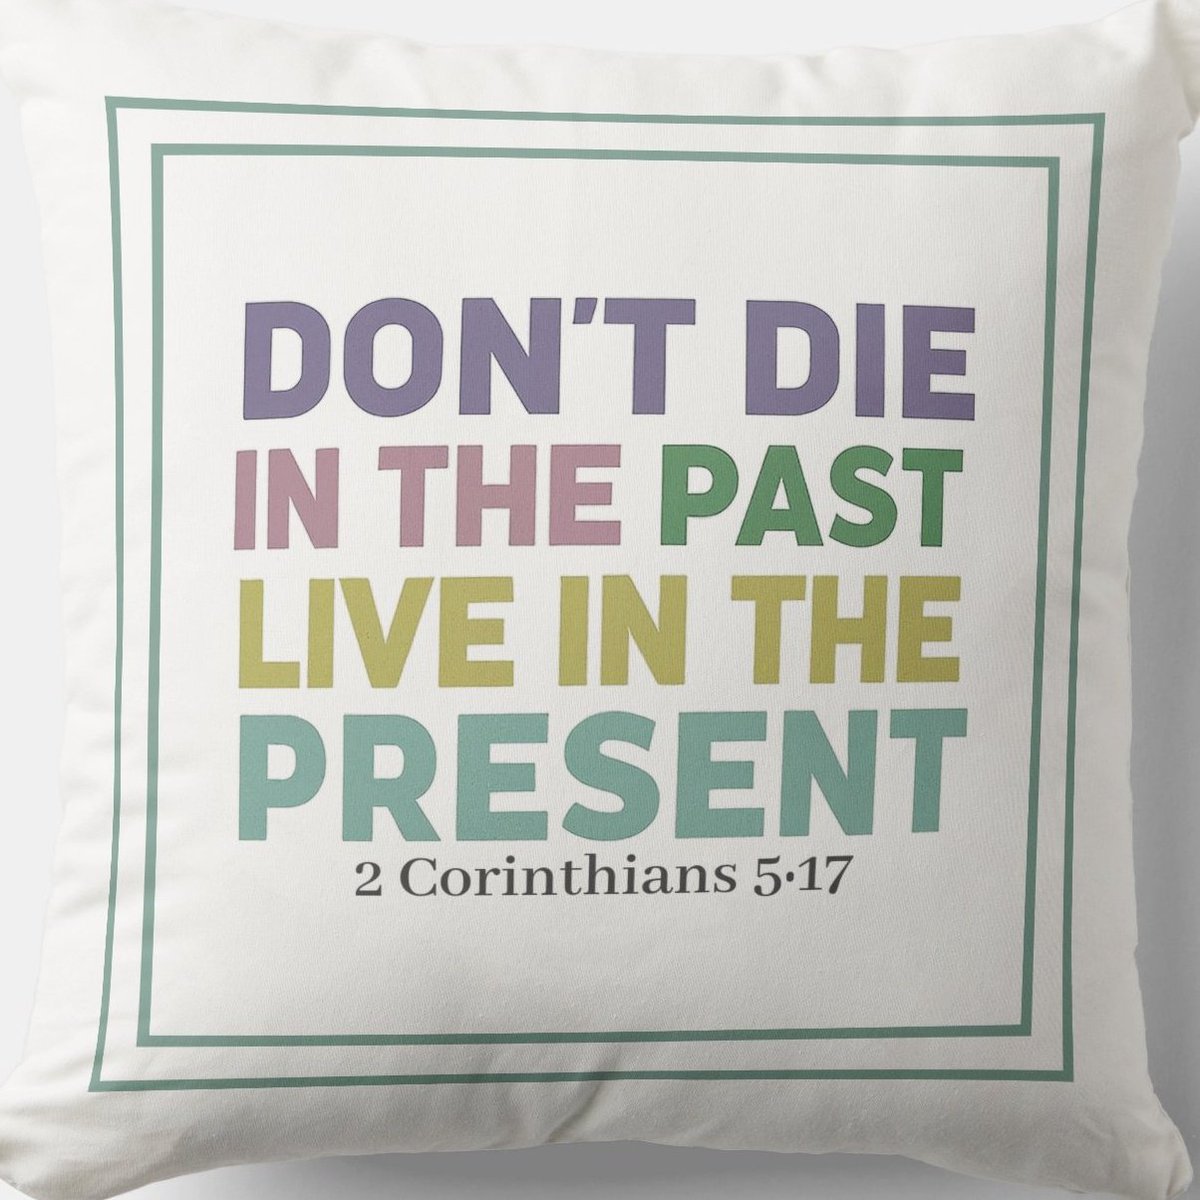 Don't Die In The Past, Live In The Present zazzle.com/dont_die_in_th… New #Pillow #Blessing #JesusChrist #JesusSaves #Jesus #christian #spiritual #Homedecoration #uniquegift #giftideas #giftformom #giftidea #HolySpirit #pillows #giftshop #giftsforher #giftsformom #faith #hope #bless